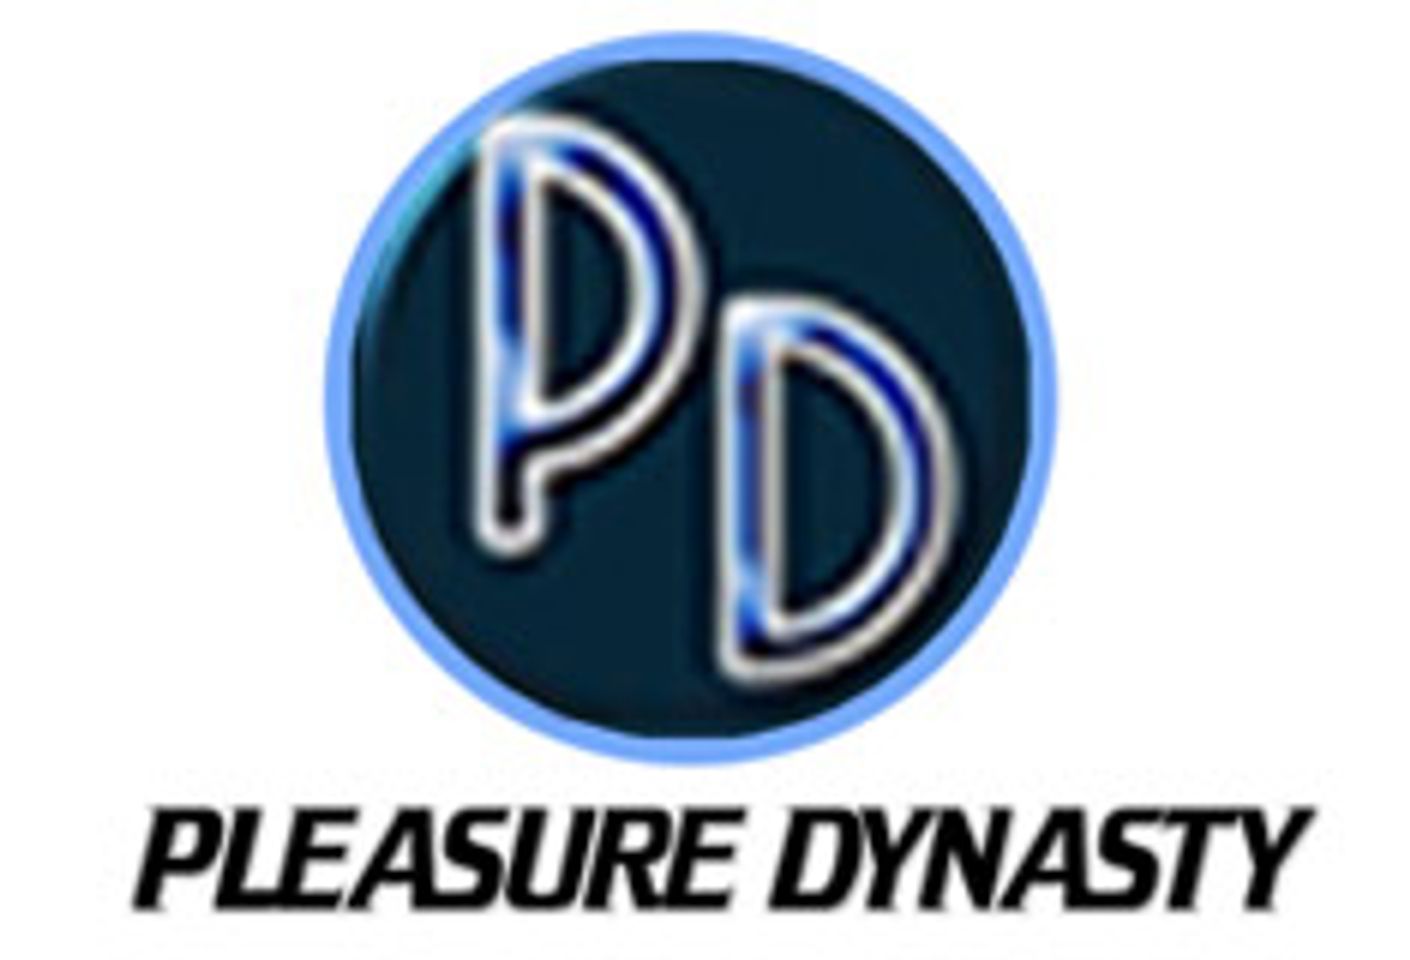 Pleasure Dynasty Showcases Miami’s Sexy Side with 2 Adult Productions